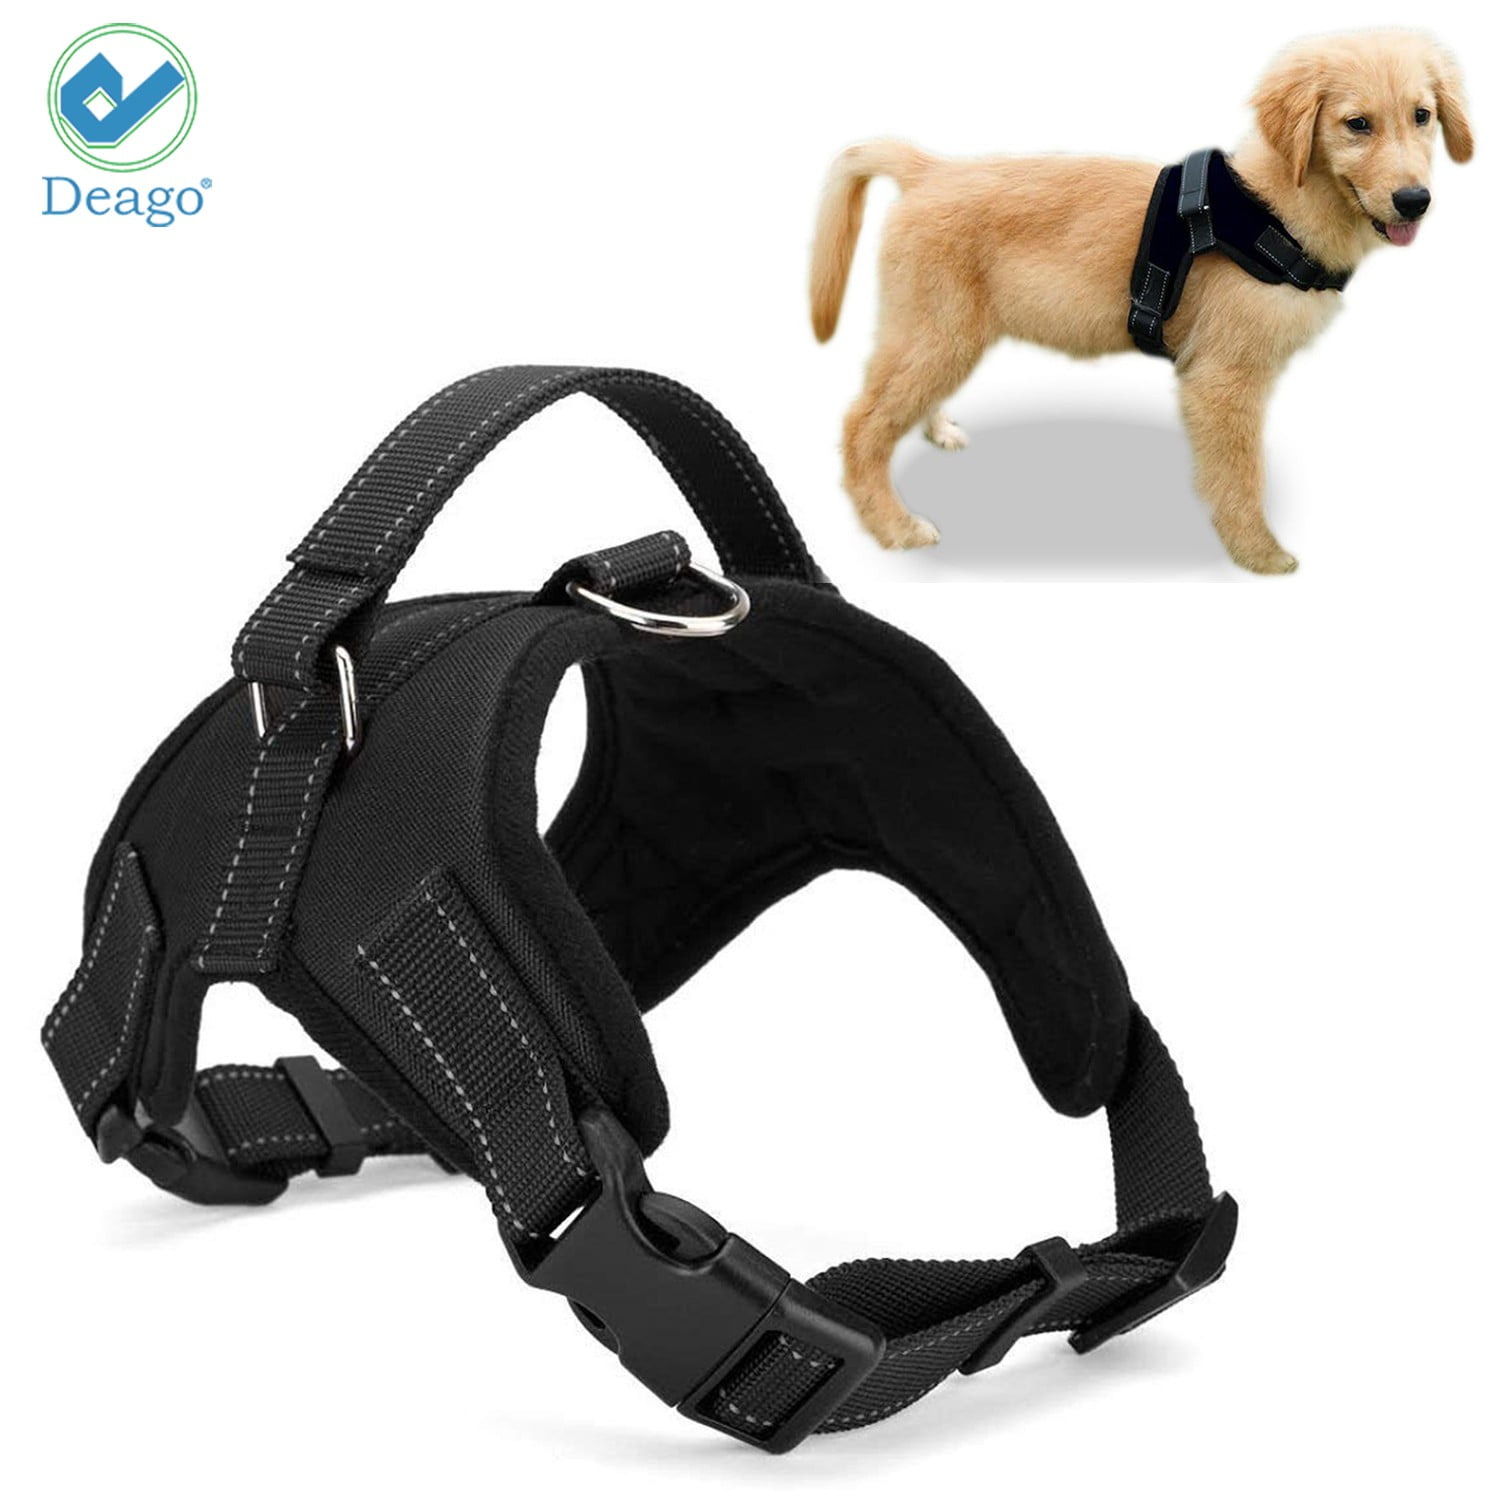 Harnais Pour Petits chiens Grand Harnais Pour Animal de compagnie sans Traction. Small Harness for Puppy Pawtitas Dog Harness for Small Dogs Great No Pull Harness for Dogs